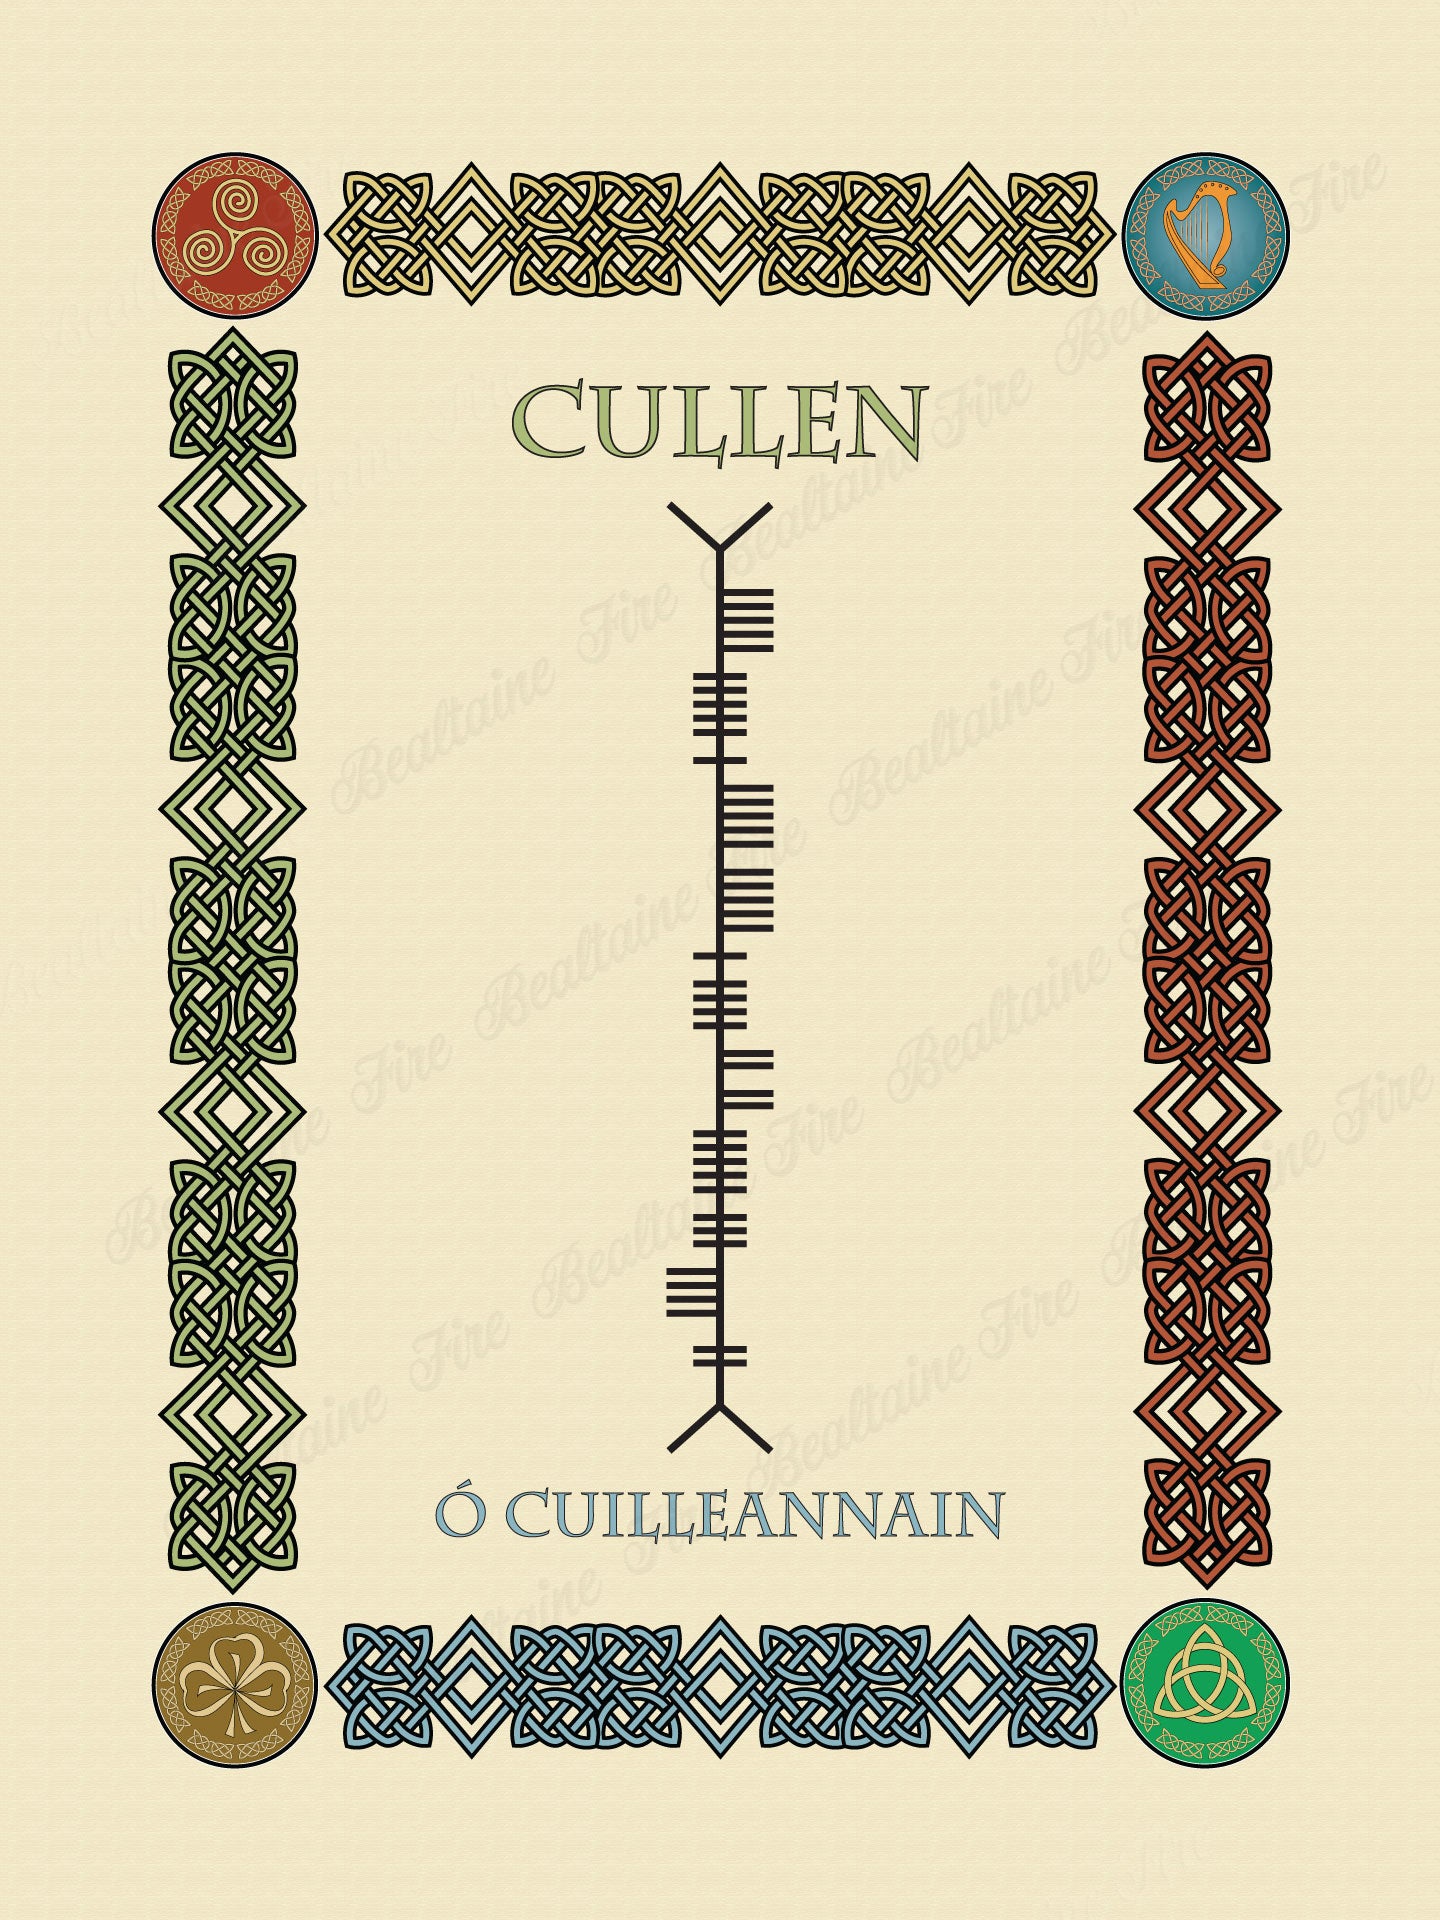 Cullen in Old Irish and Ogham - Premium luster unframed print